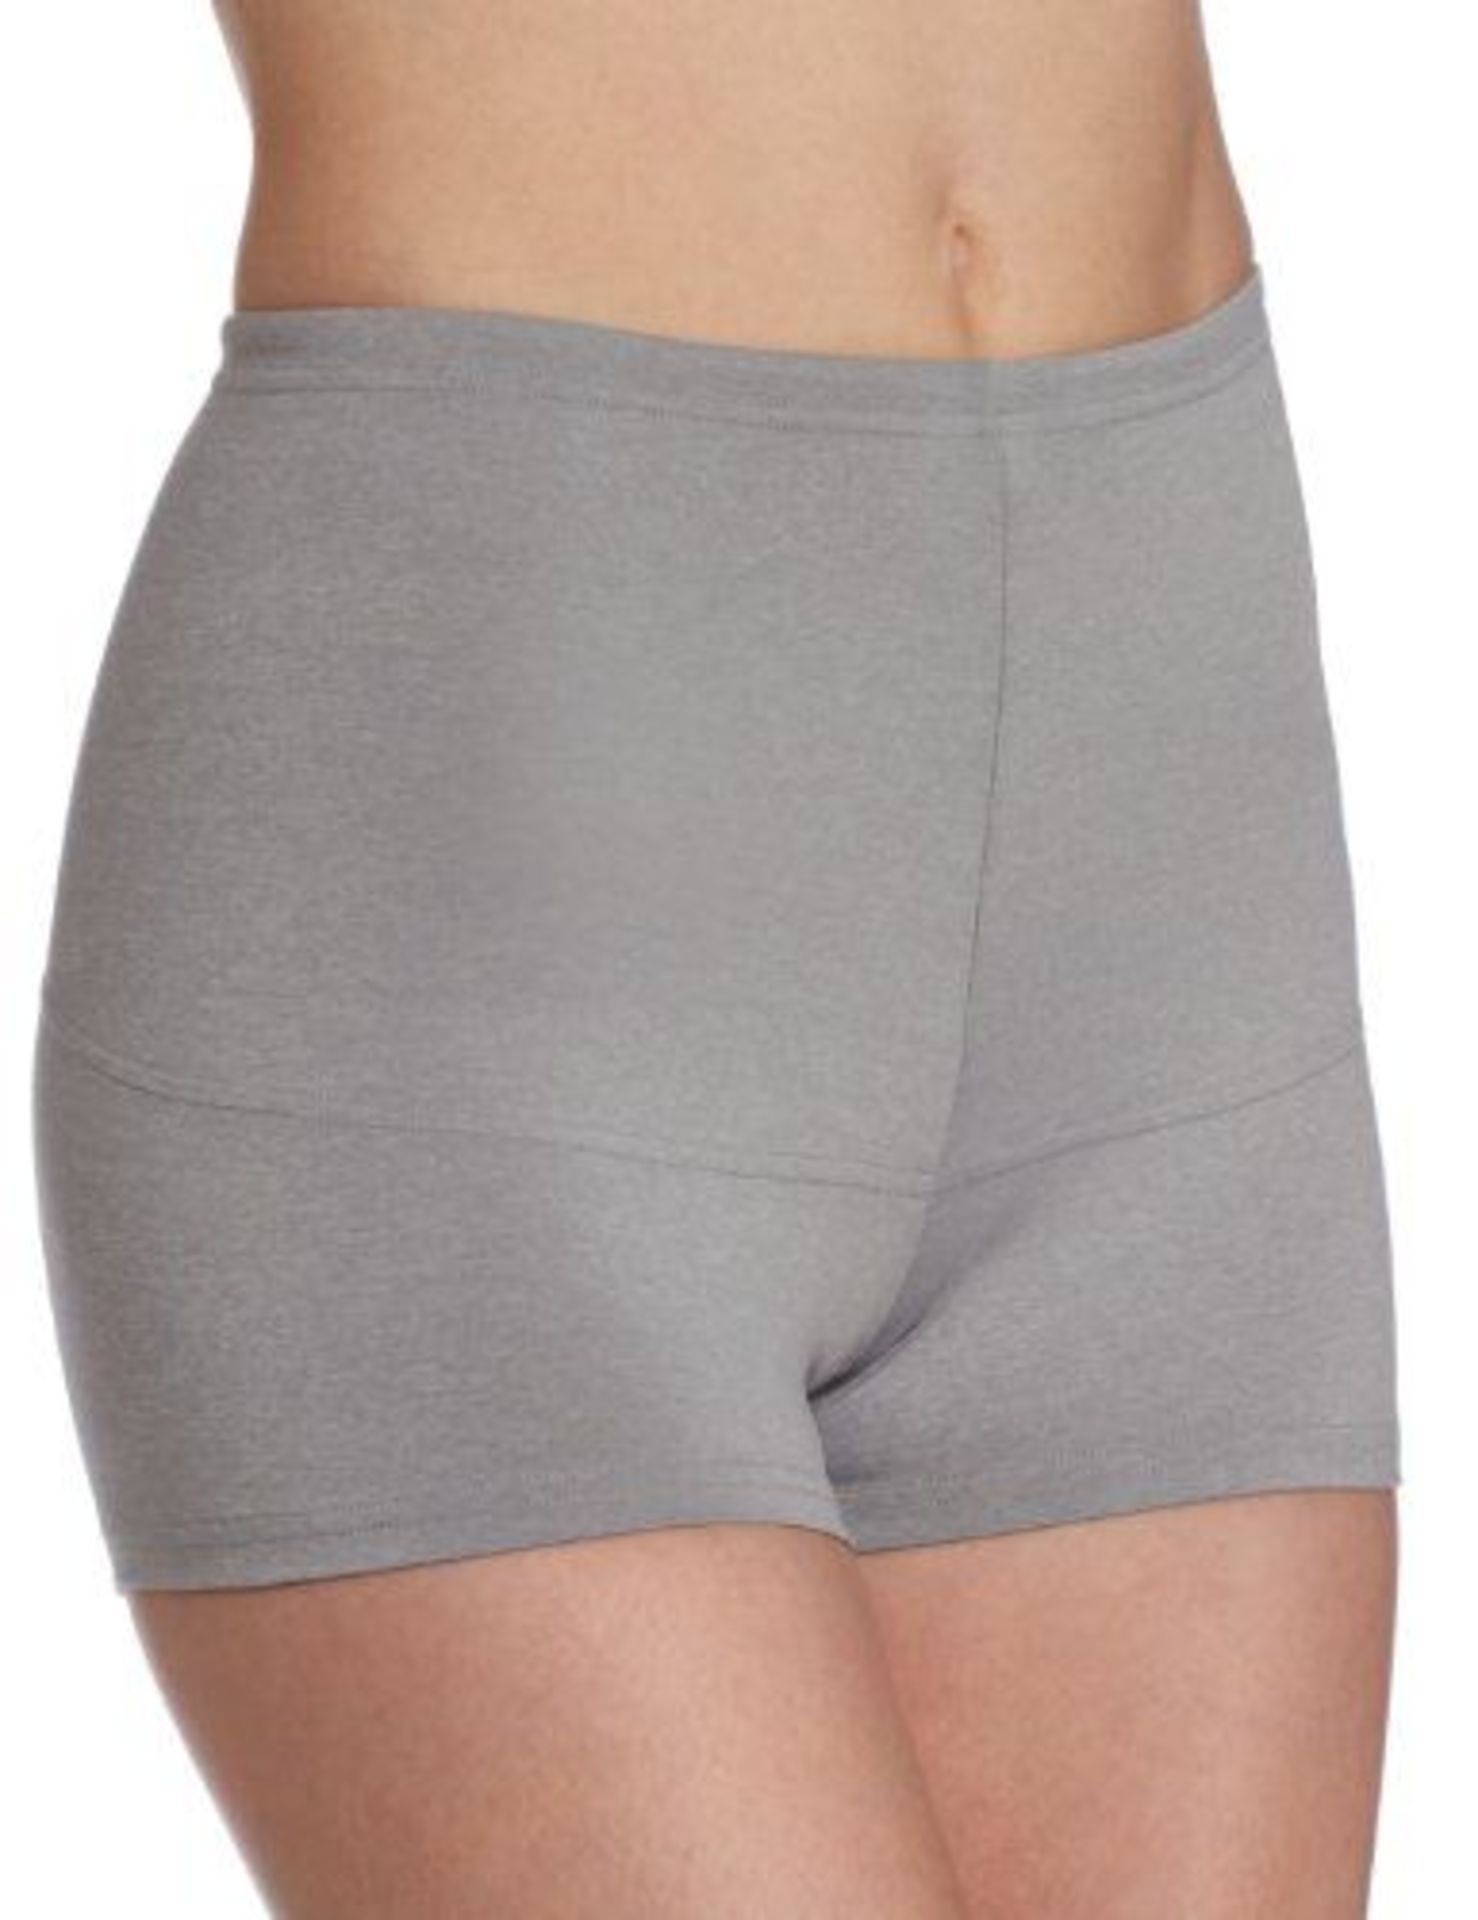 V Brand New A Lot Of Five Pairs Light Grey Maidenform Flexees Firm Control Tummy Toning Boyshorts